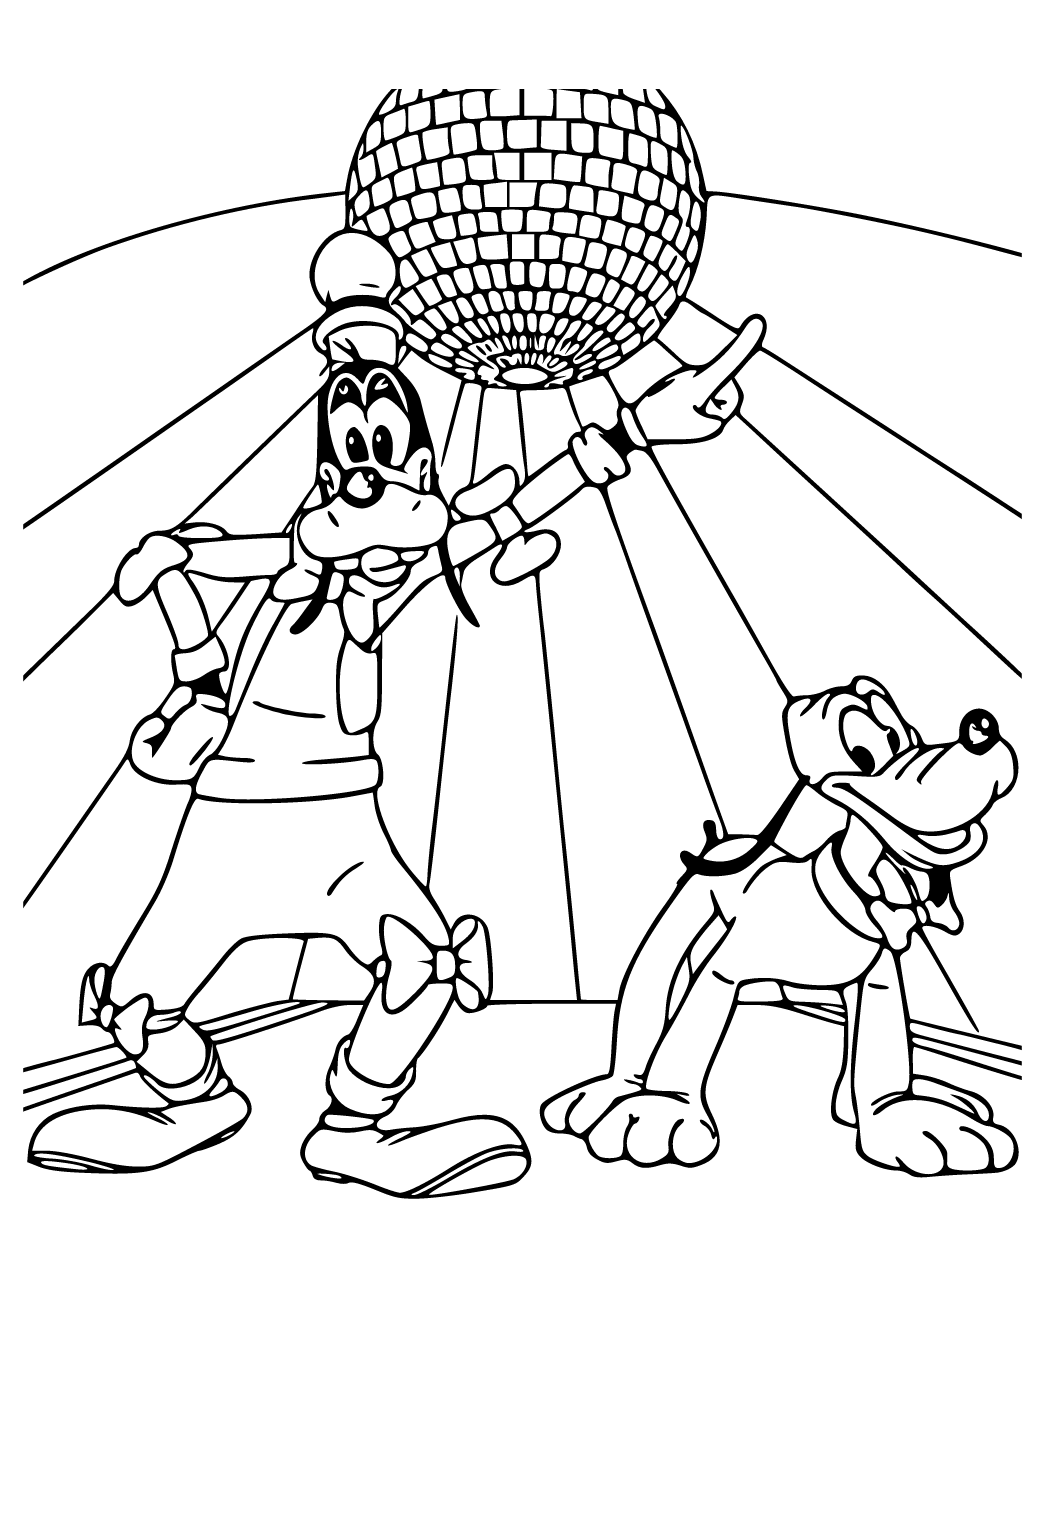 mickeys clubhouse coloring pages free printables